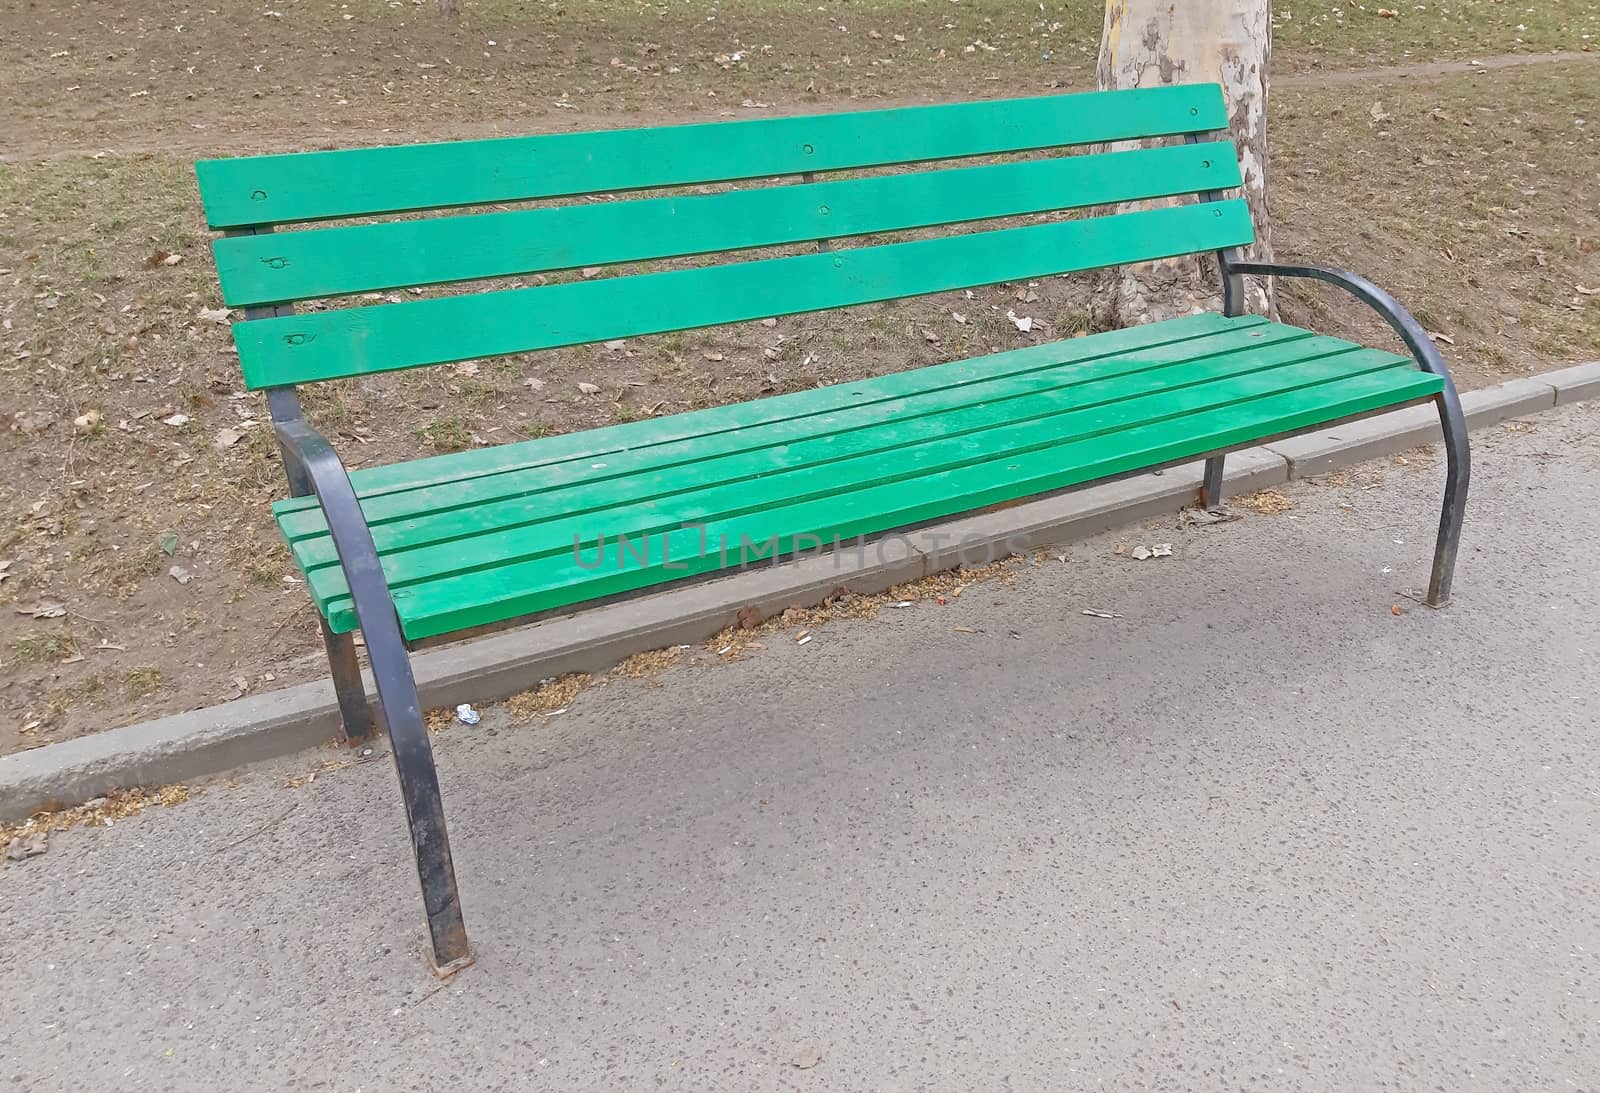 A green chair in the park on the sidewalk.